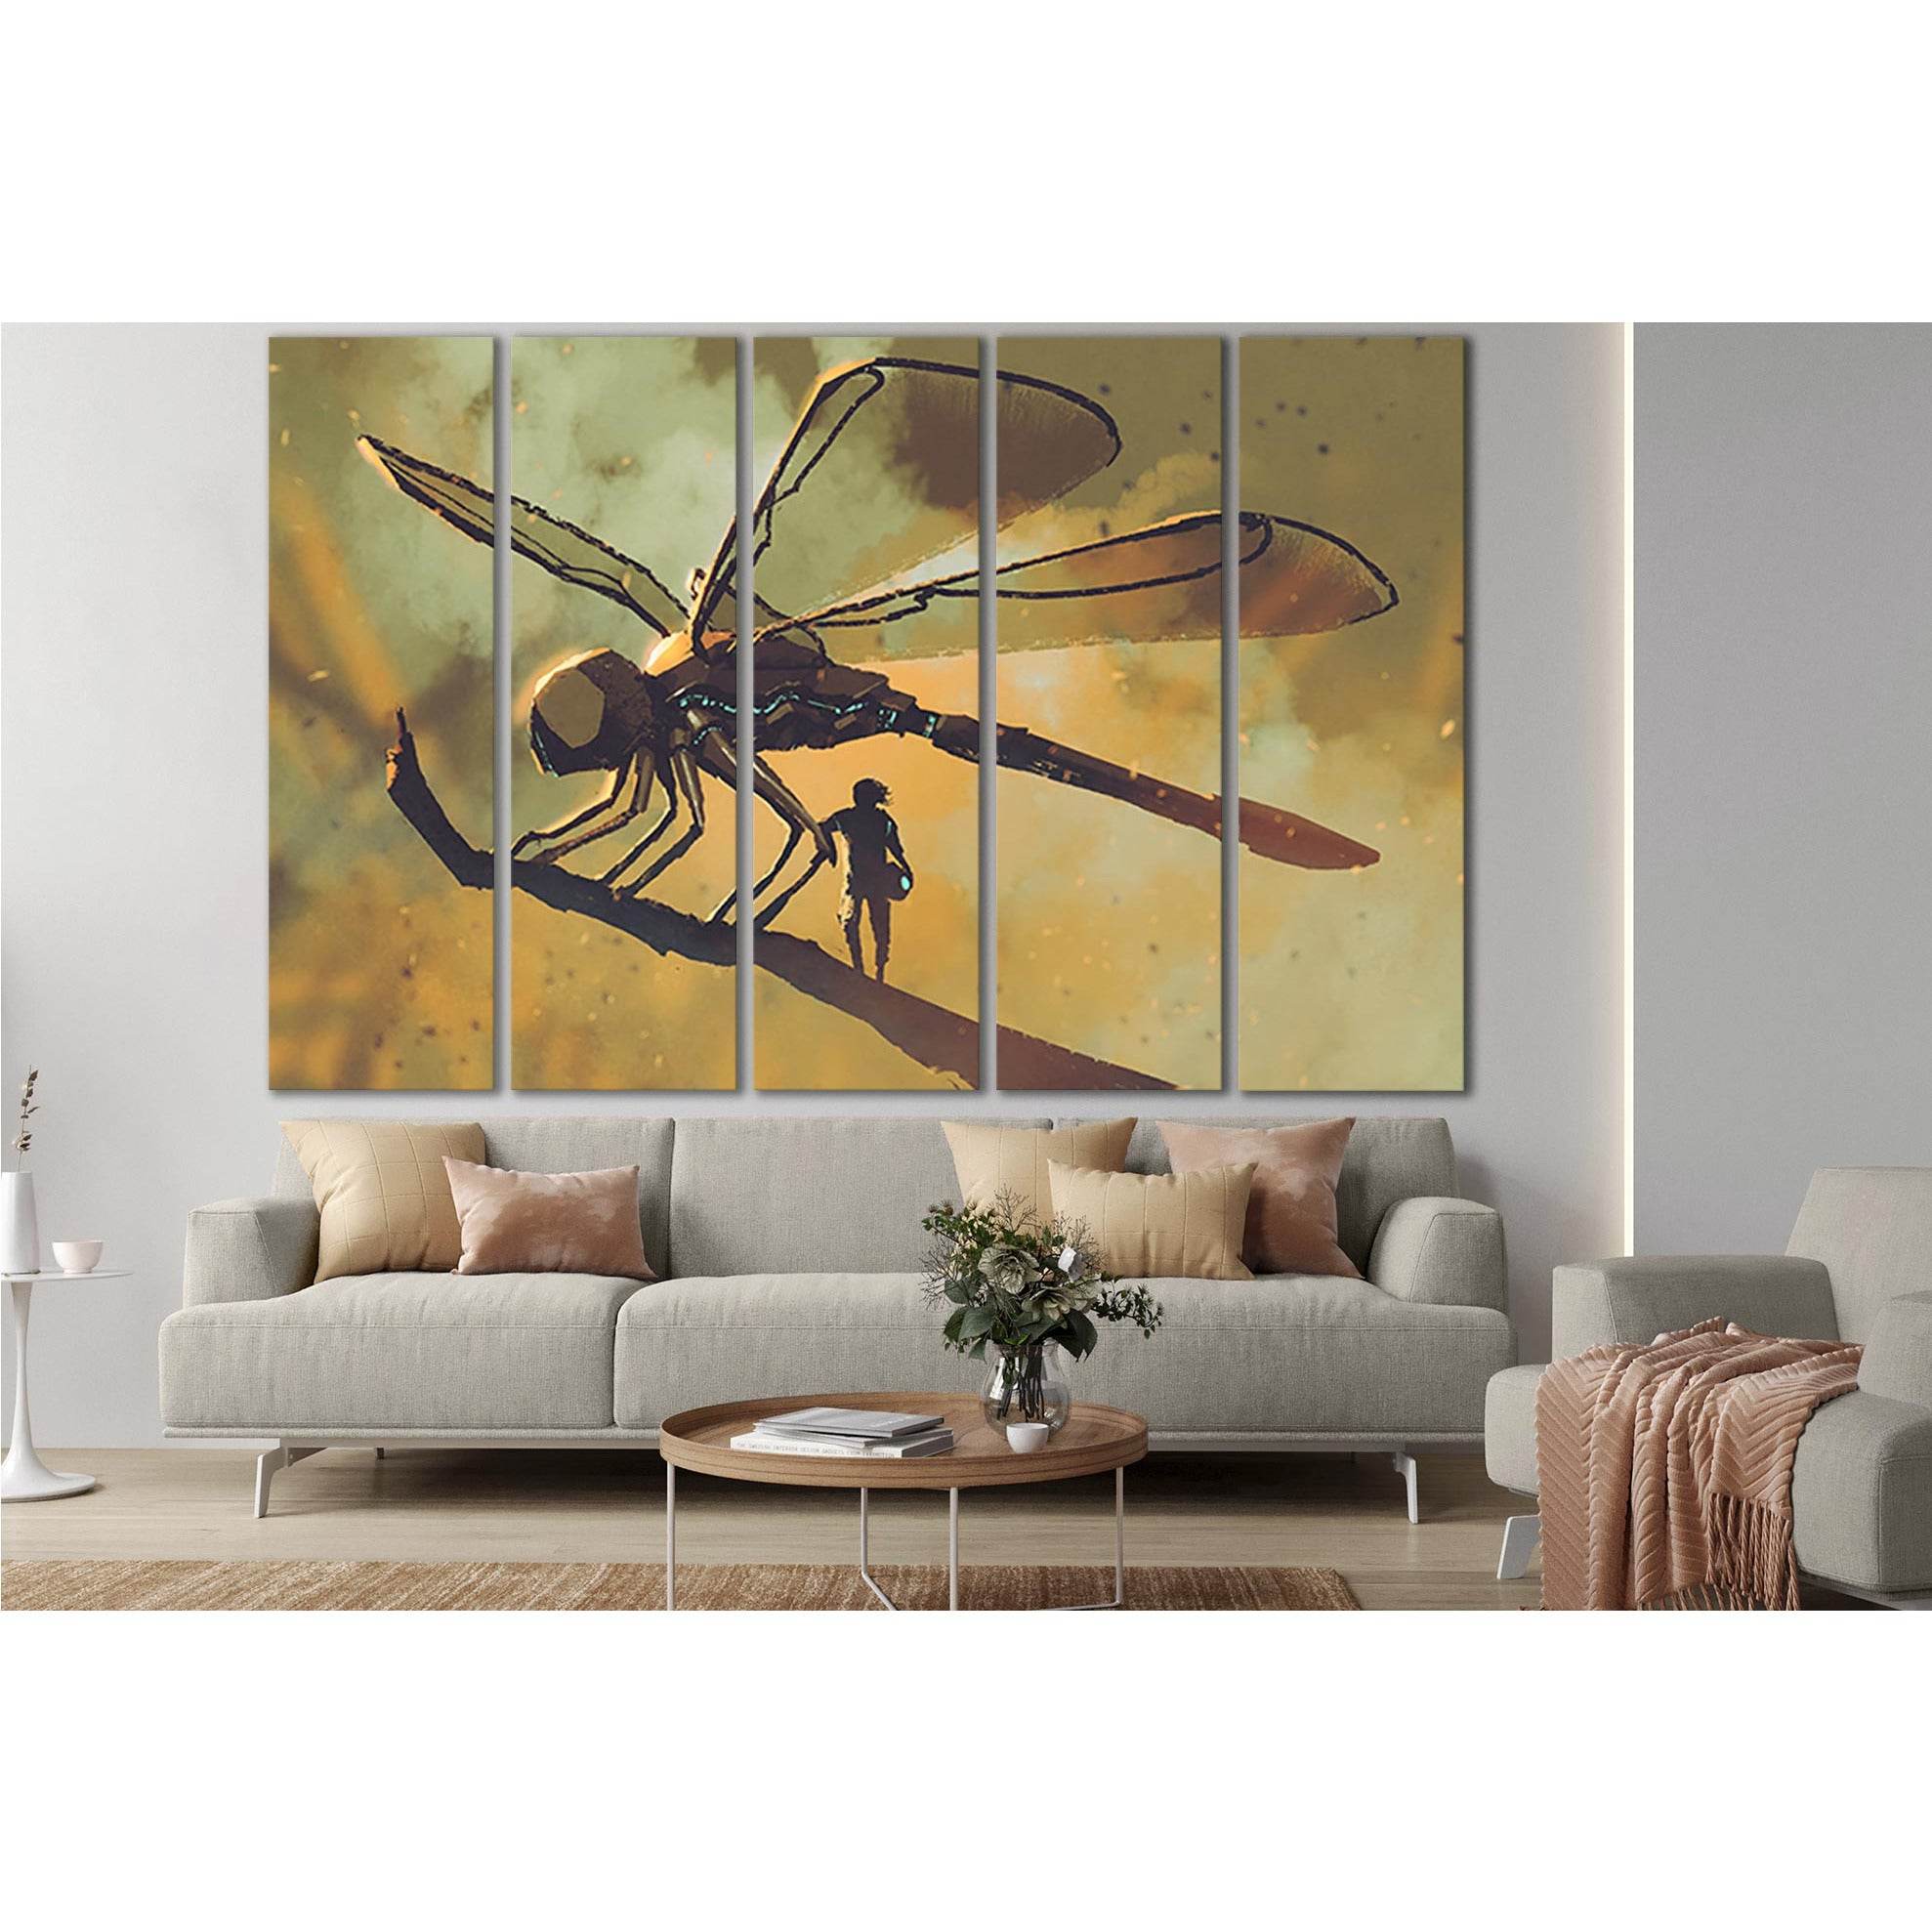 Pilot With Giant Mechanical Dragonfly №SL1258 Ready to Hang Canvas Print